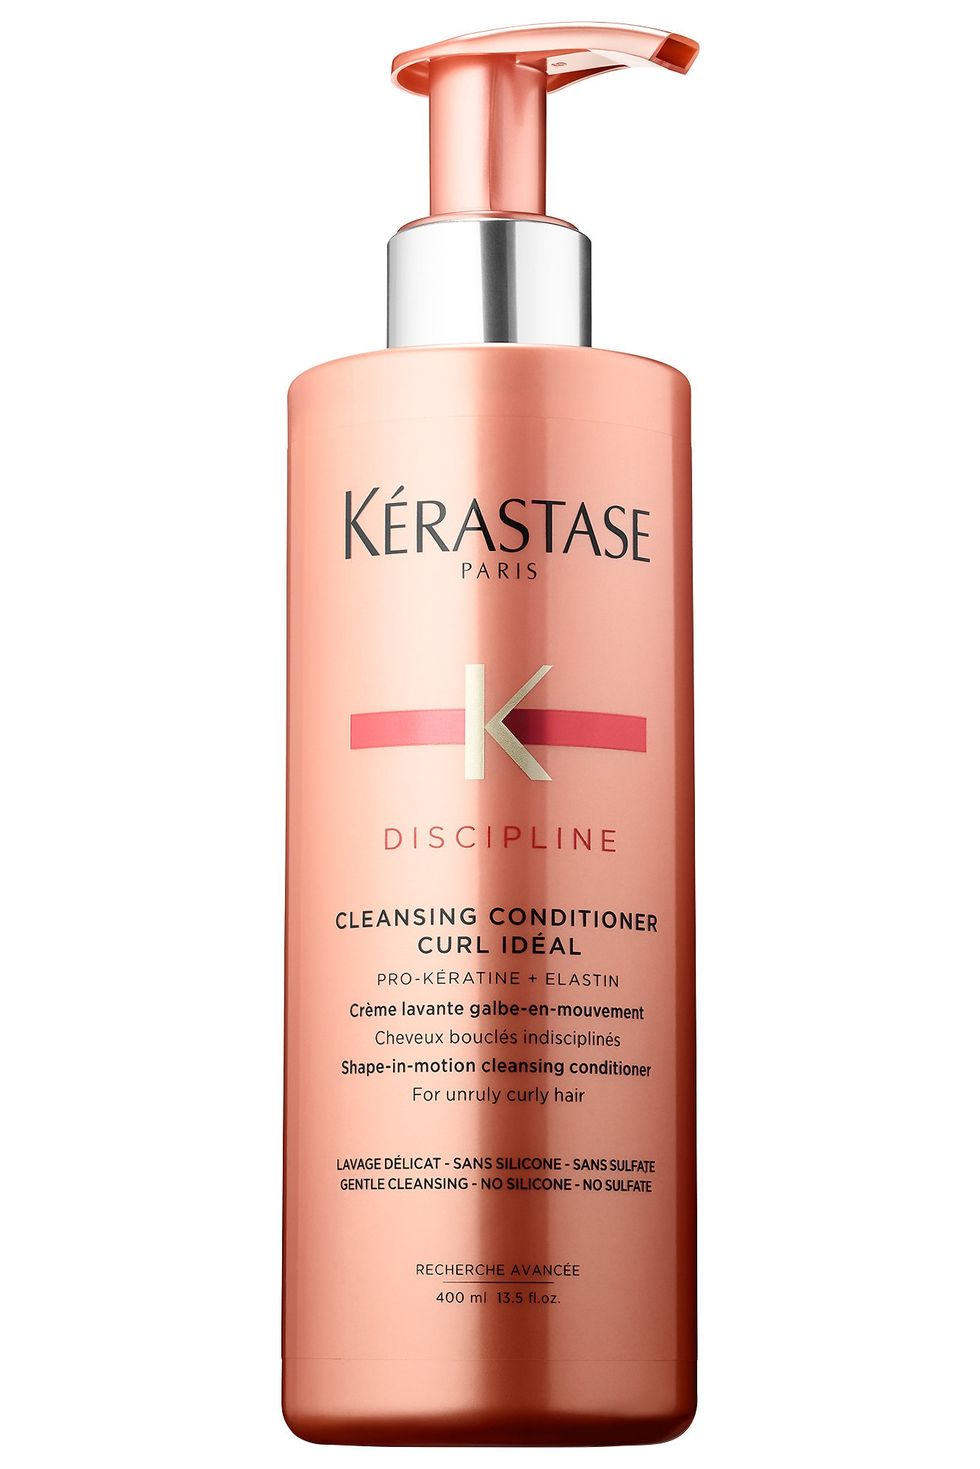 pude ryste ligegyldighed 15 Best Shampoos of 2022 - Top Shampoo Brands for Every Hair Type & Texture